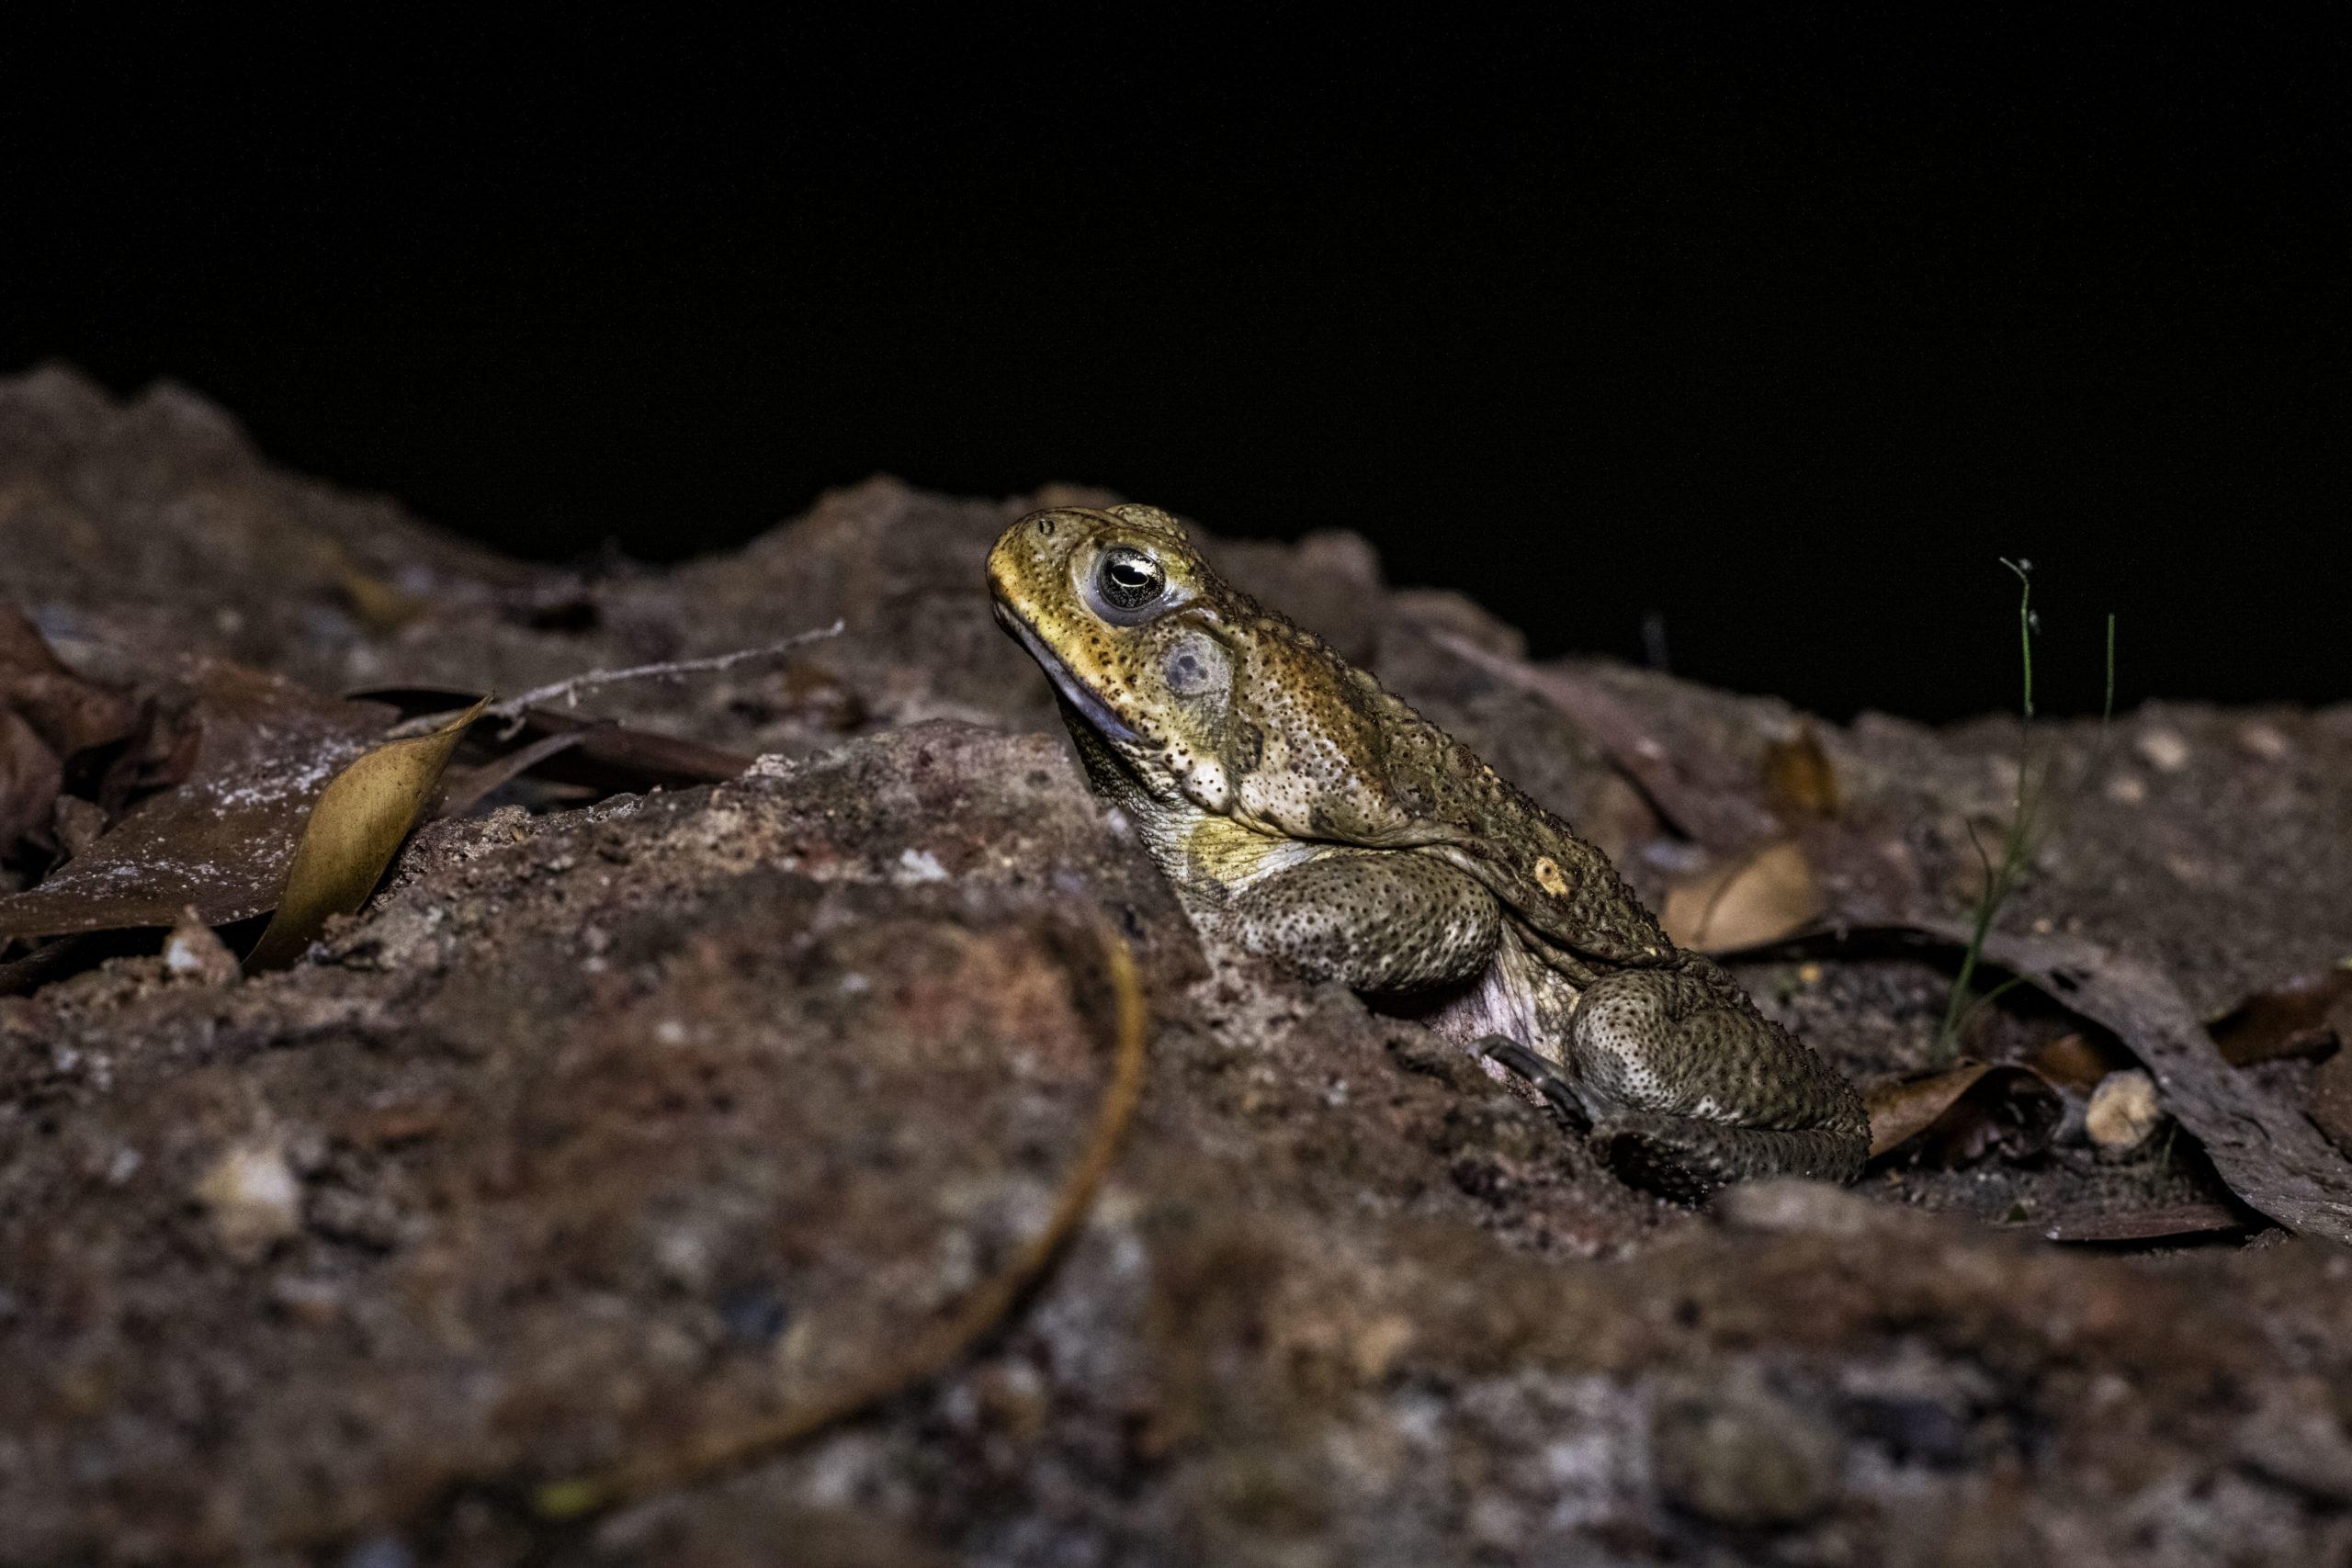 Photo of a cane toad at night next to a waterhole.